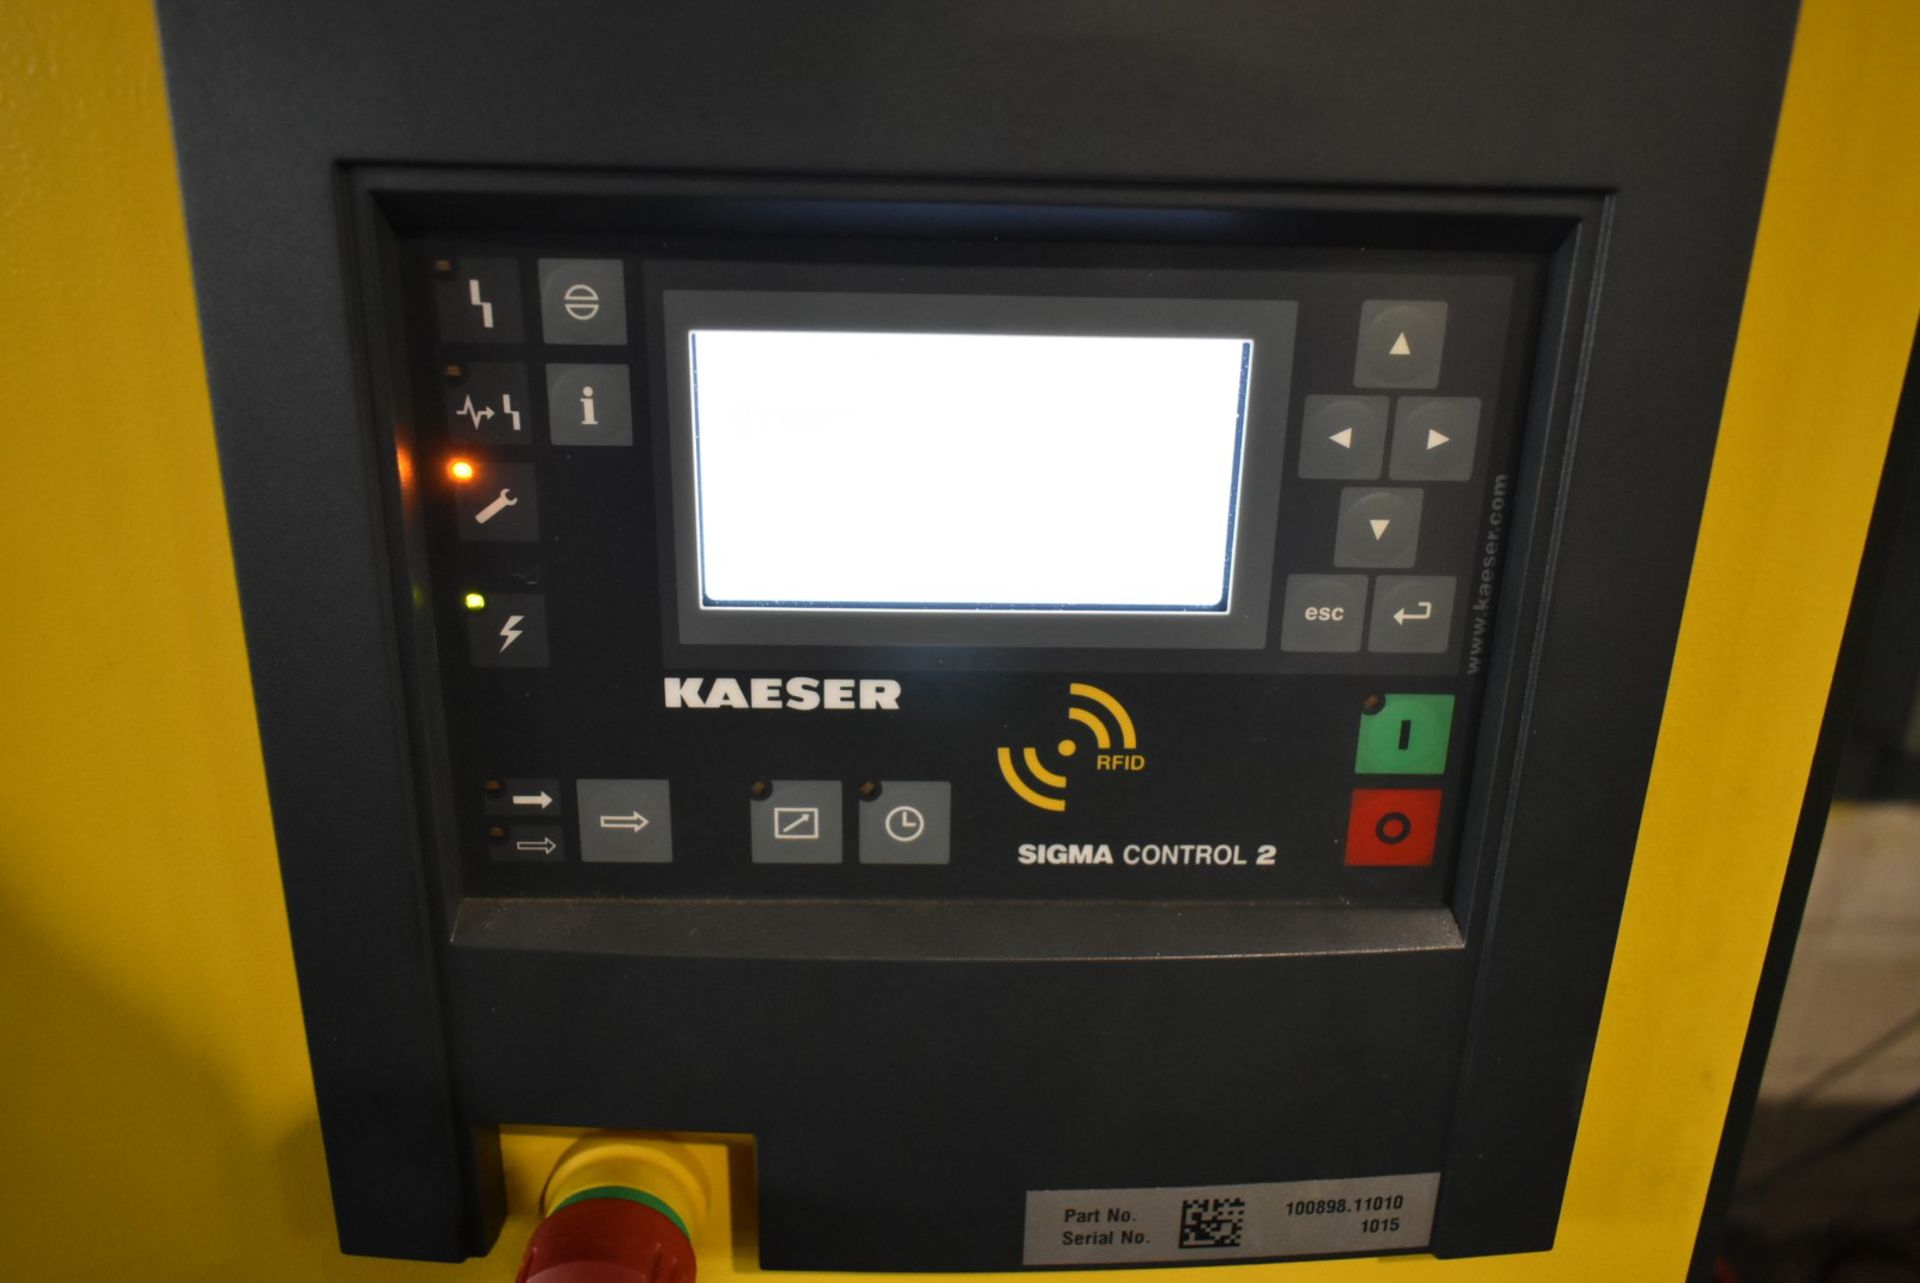 KAESER SX5 ROTARY SCREW COMPRESSOR WITH 2664HRS (RECORDED ON METER @ TIME OF LISTING) S/N: 1015 ( - Image 3 of 4